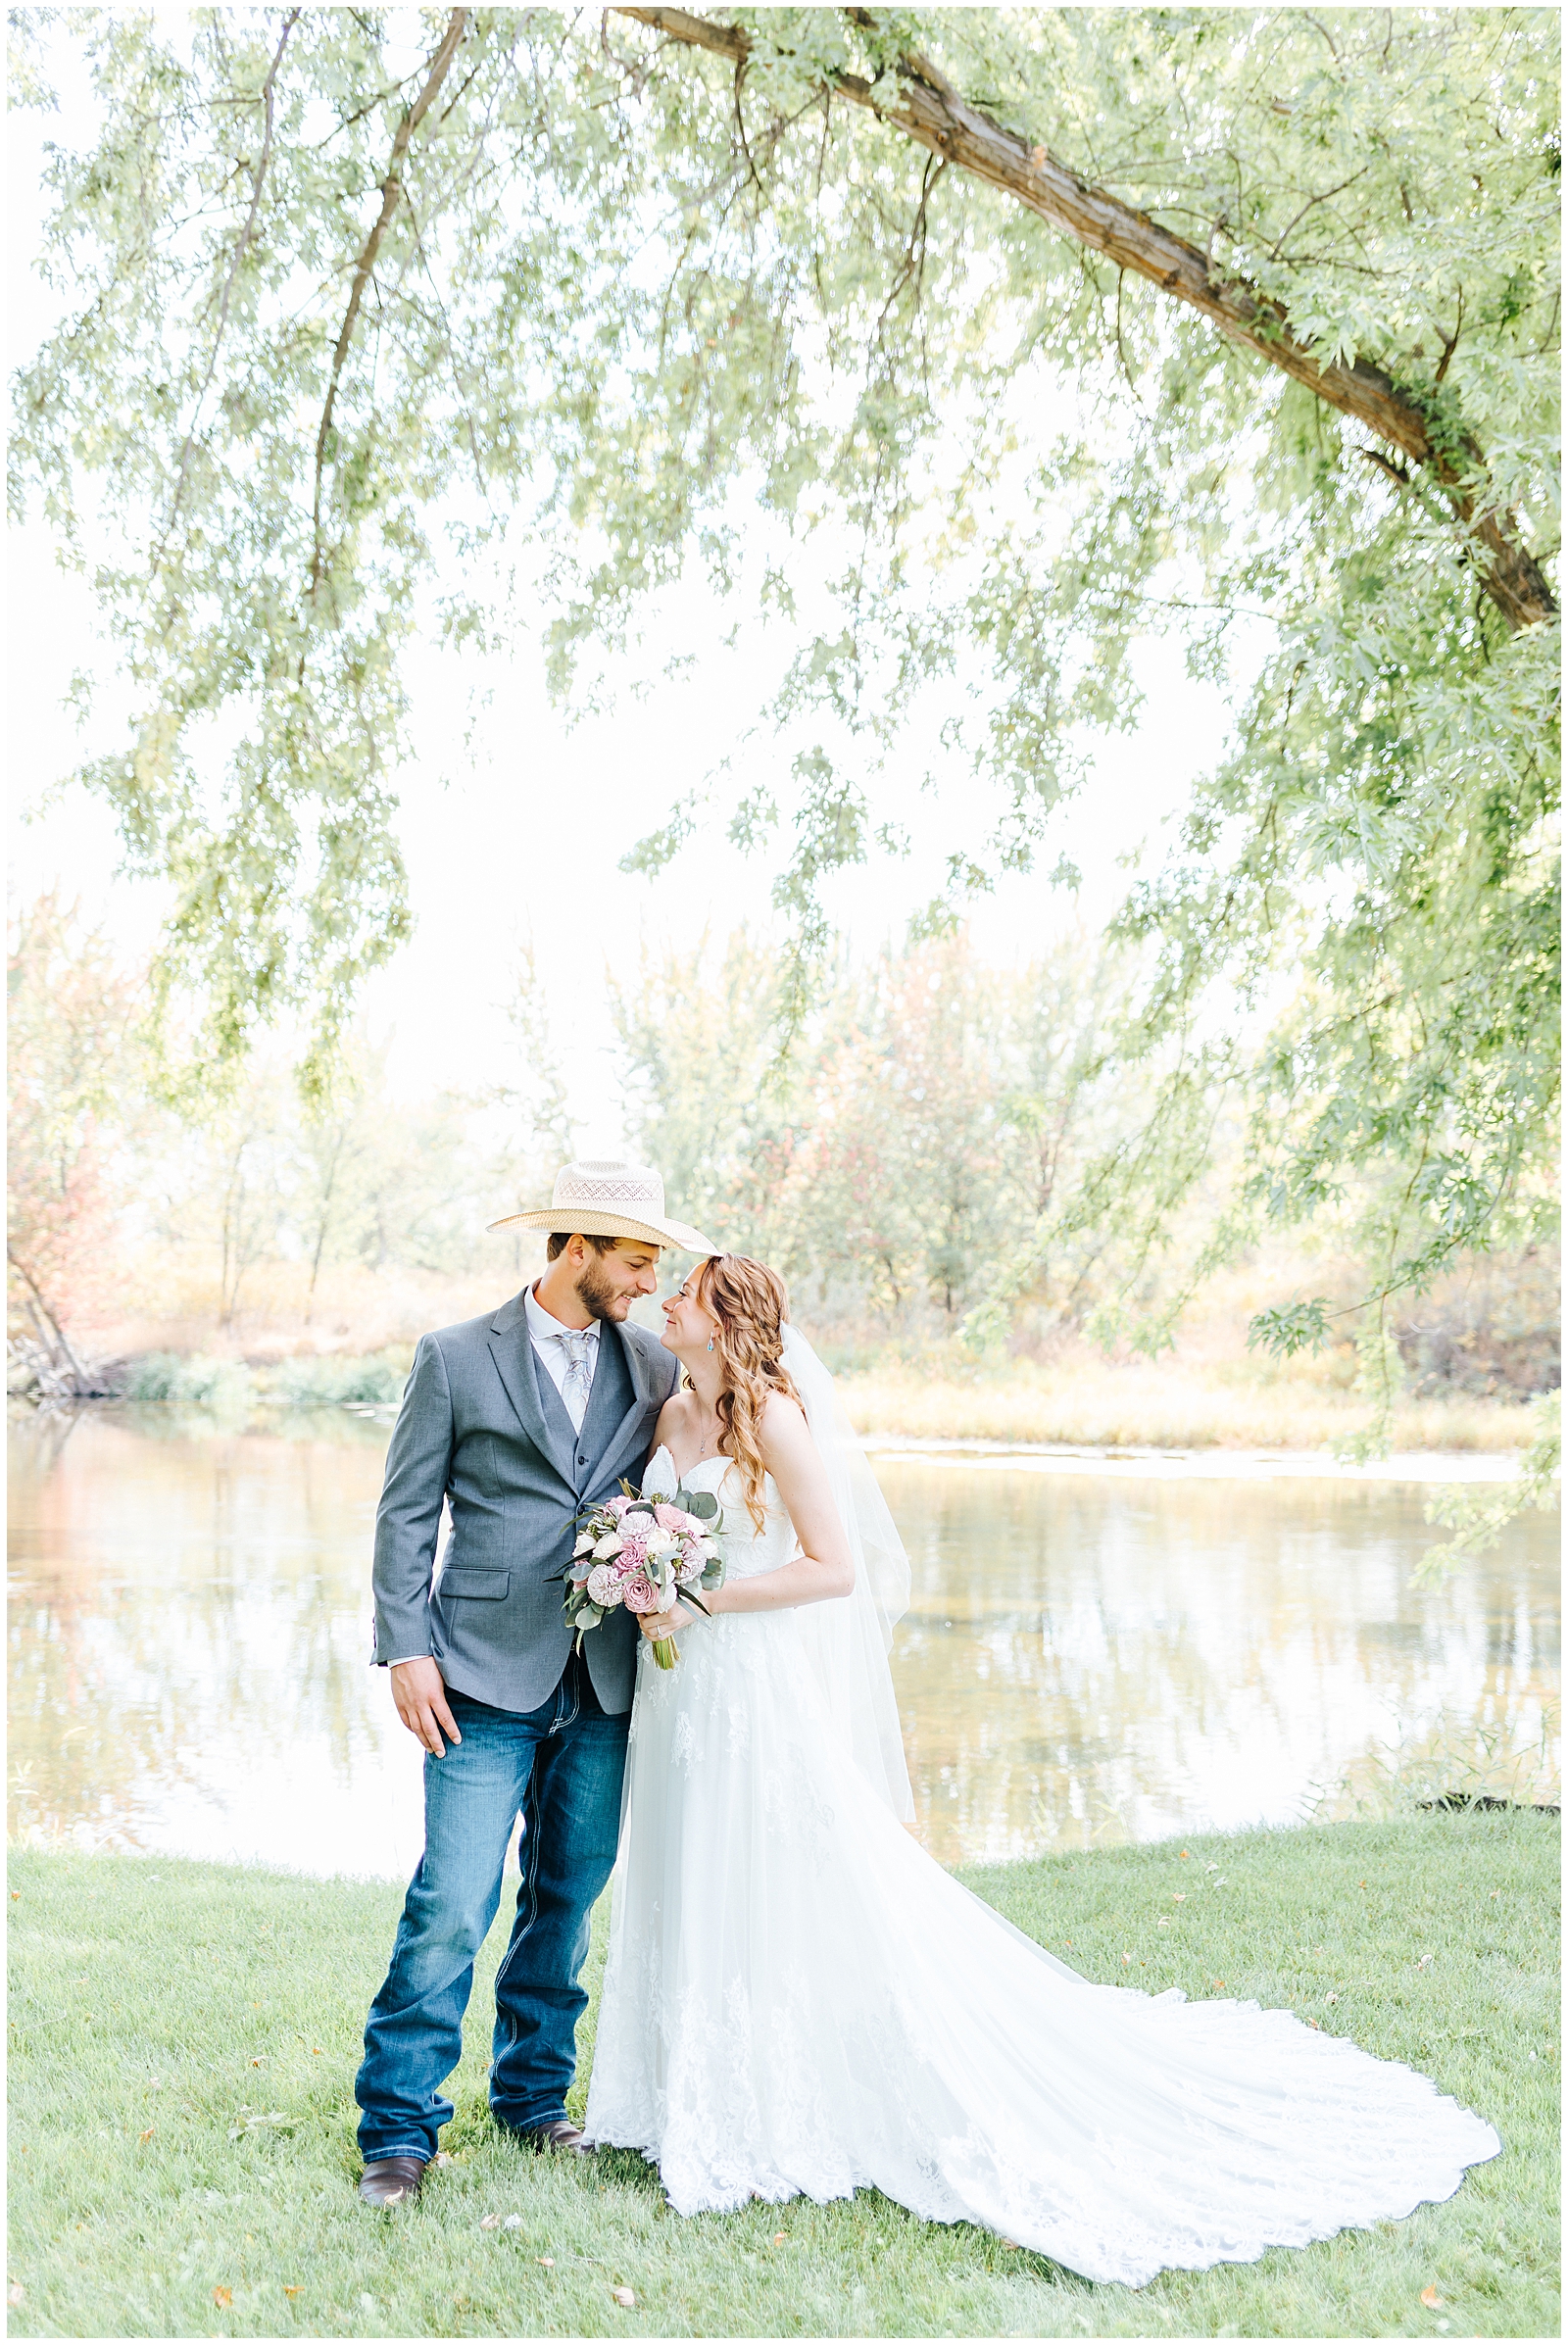 Rustic Chic White Willow Estate Wedding Bride and Groom Portraits